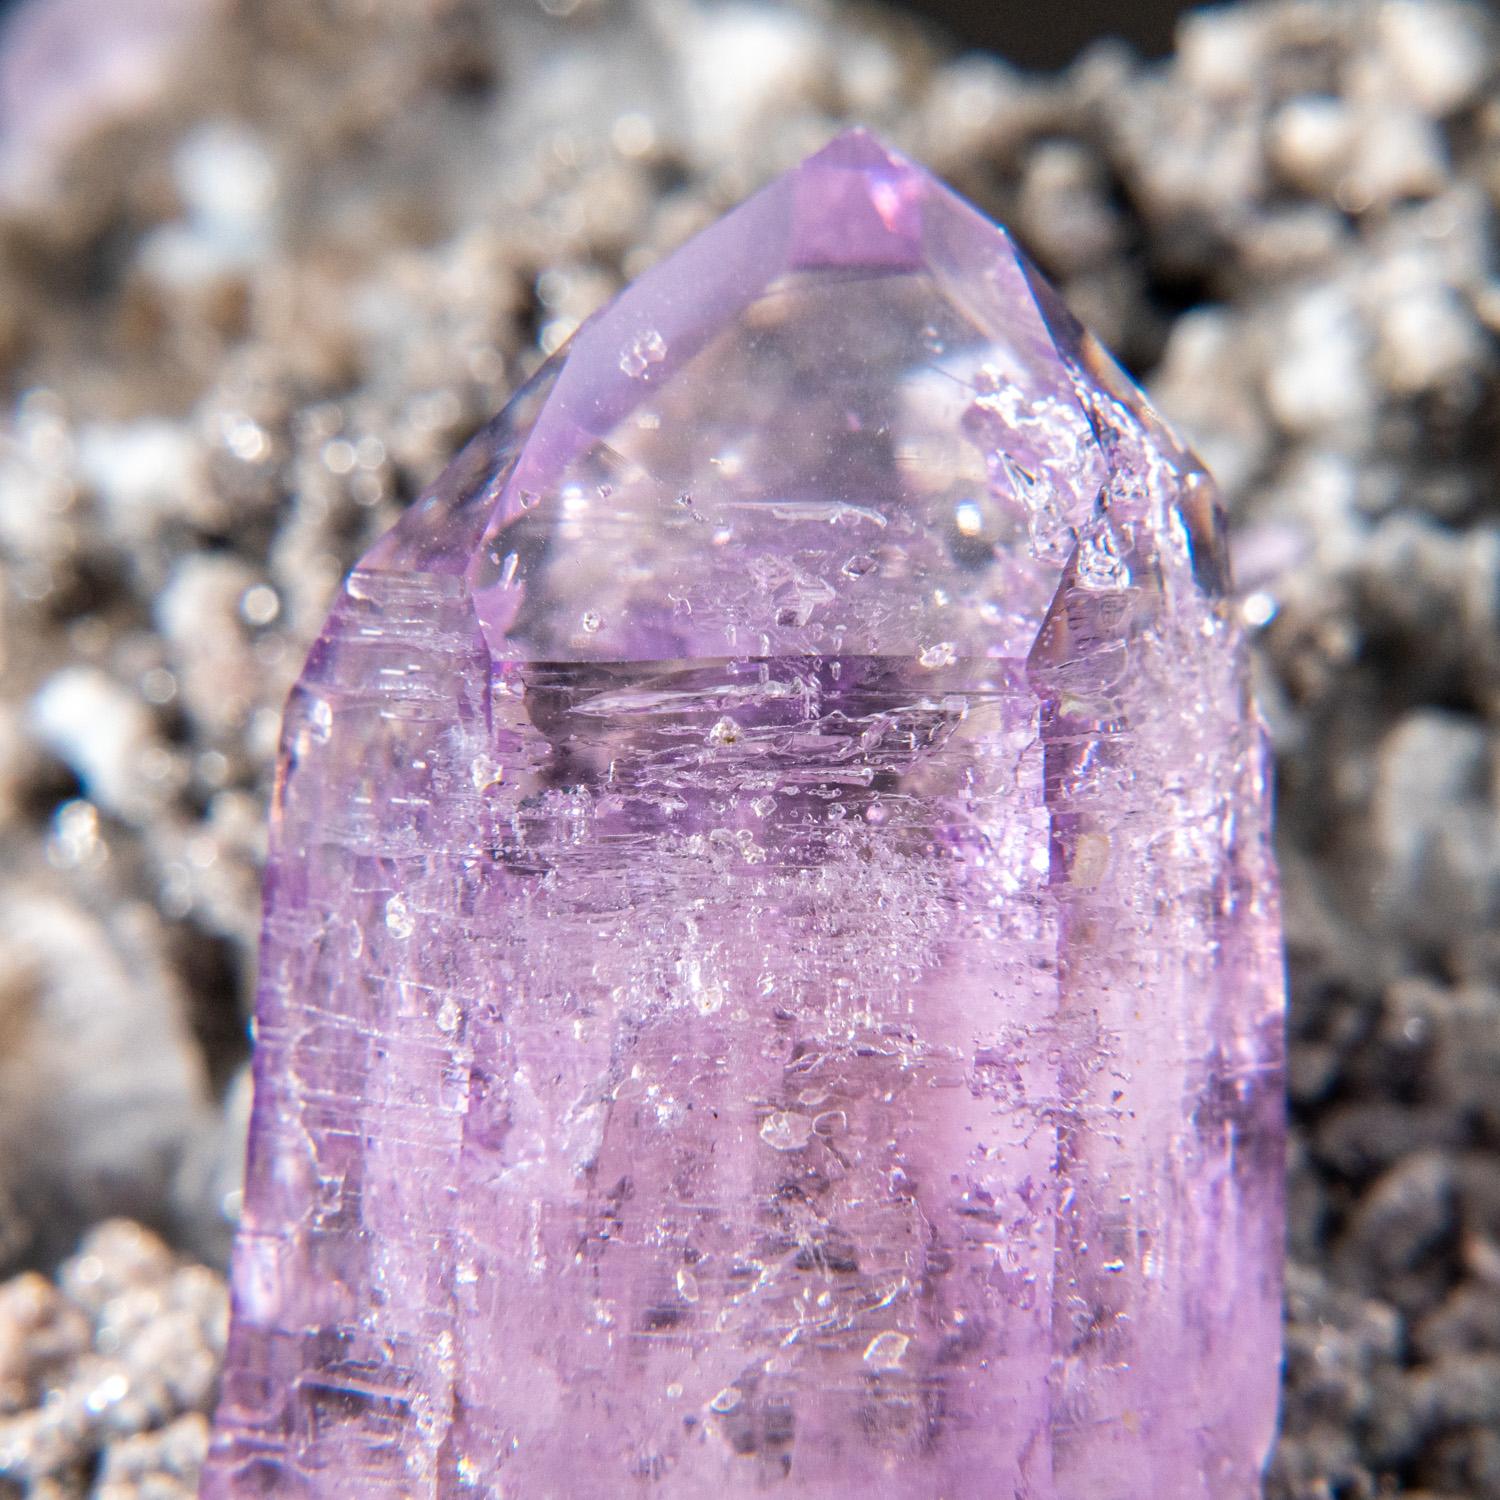 Beautiful specimen from Piedra Parada, Las Vigas de Ramirez, Veracruz, Mexico.

Transparent purple amethyst quartz crystal with lustrous crystal surfaces and rich purple color with well defined phantom zoning. The crystal fully terminated with